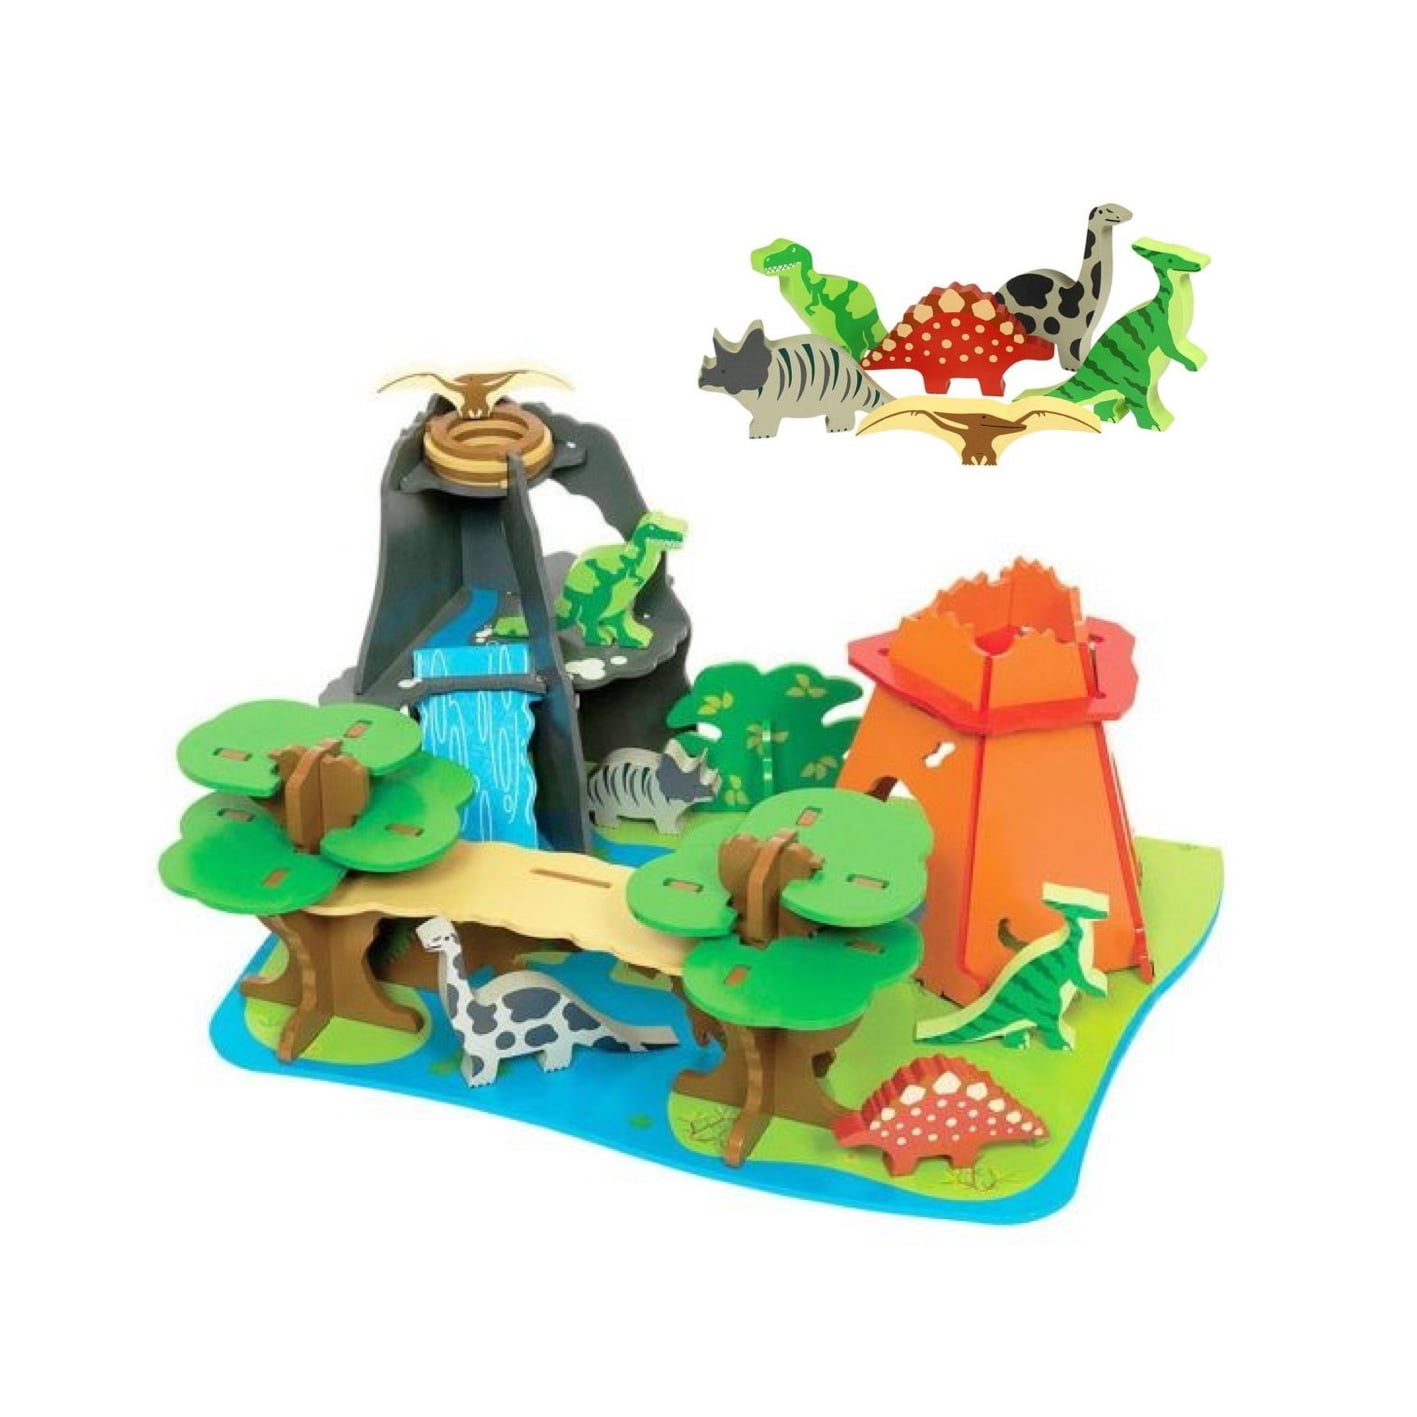 Wooden Dino Island with figures